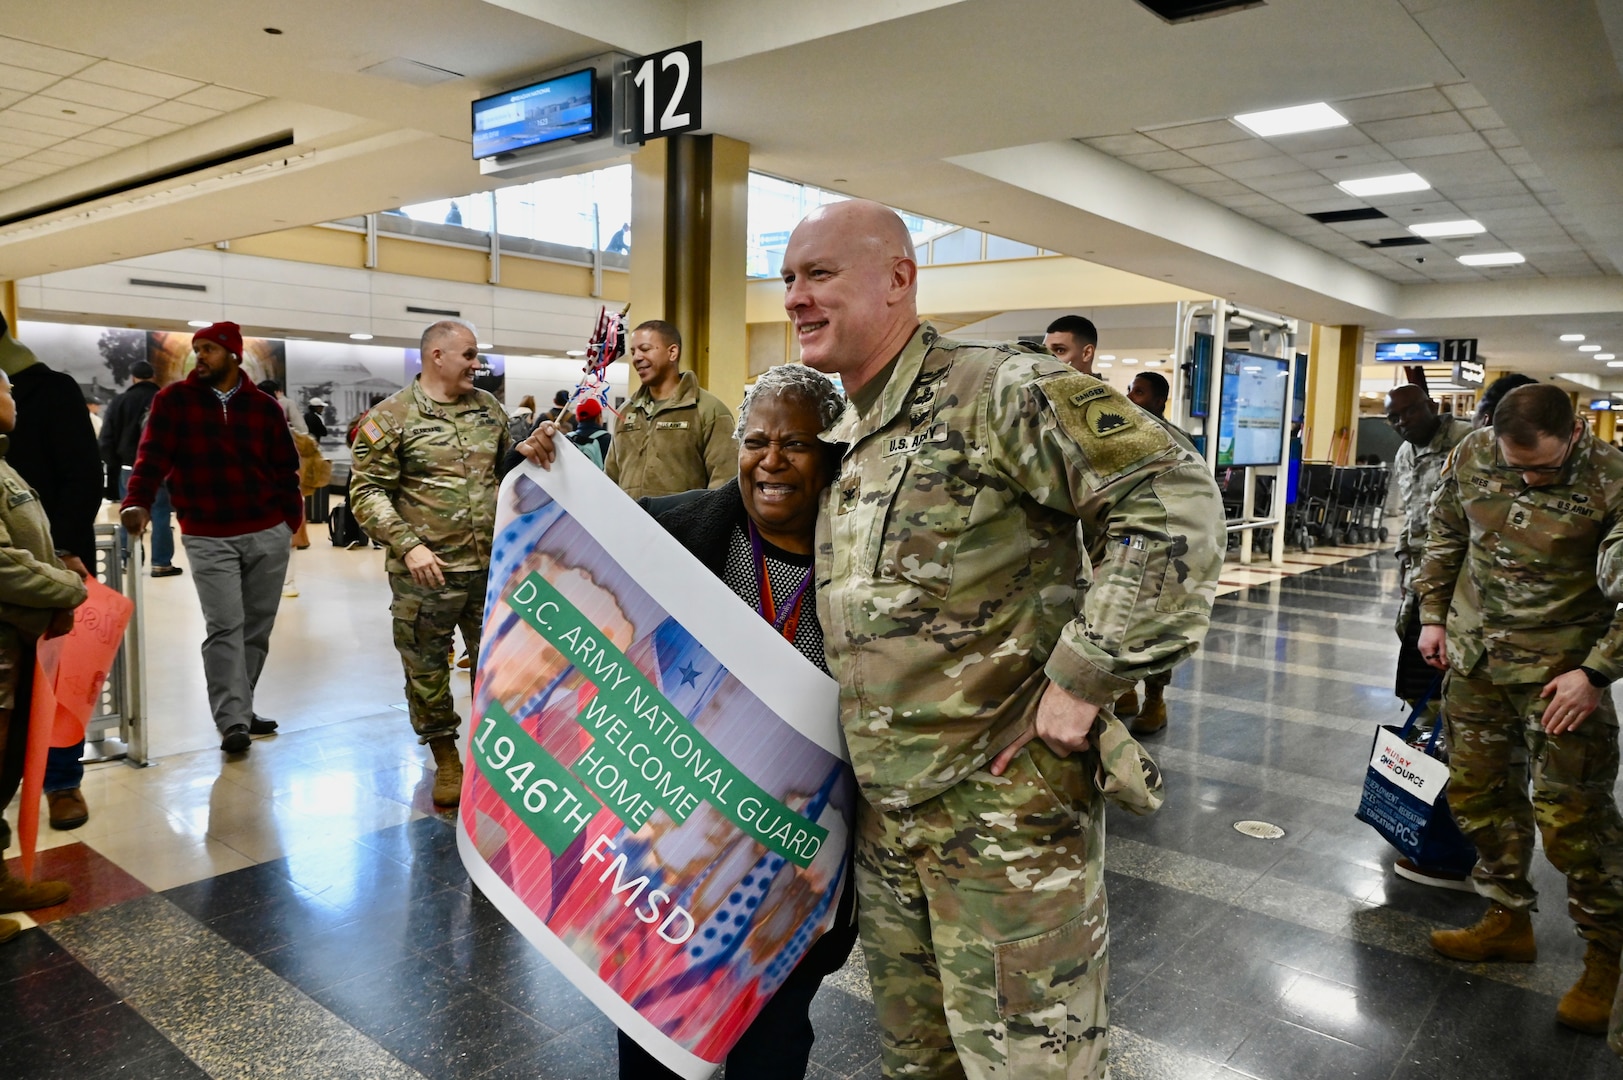 Soldiers with the 1946th Financial Management Support Detachment, District of Columbia National Guard, are greeted by family, friends, senior leadership and D.C. National Guard Family Programs reps at Ronald Reagan Washington National Airport, Feb. 16, 2024. Guard members returned from a nine-month deployment to Camp Bondsteel, Kosovo, providing financial management support to Kosovo Forces assigned to the NATO peacekeeping mission.